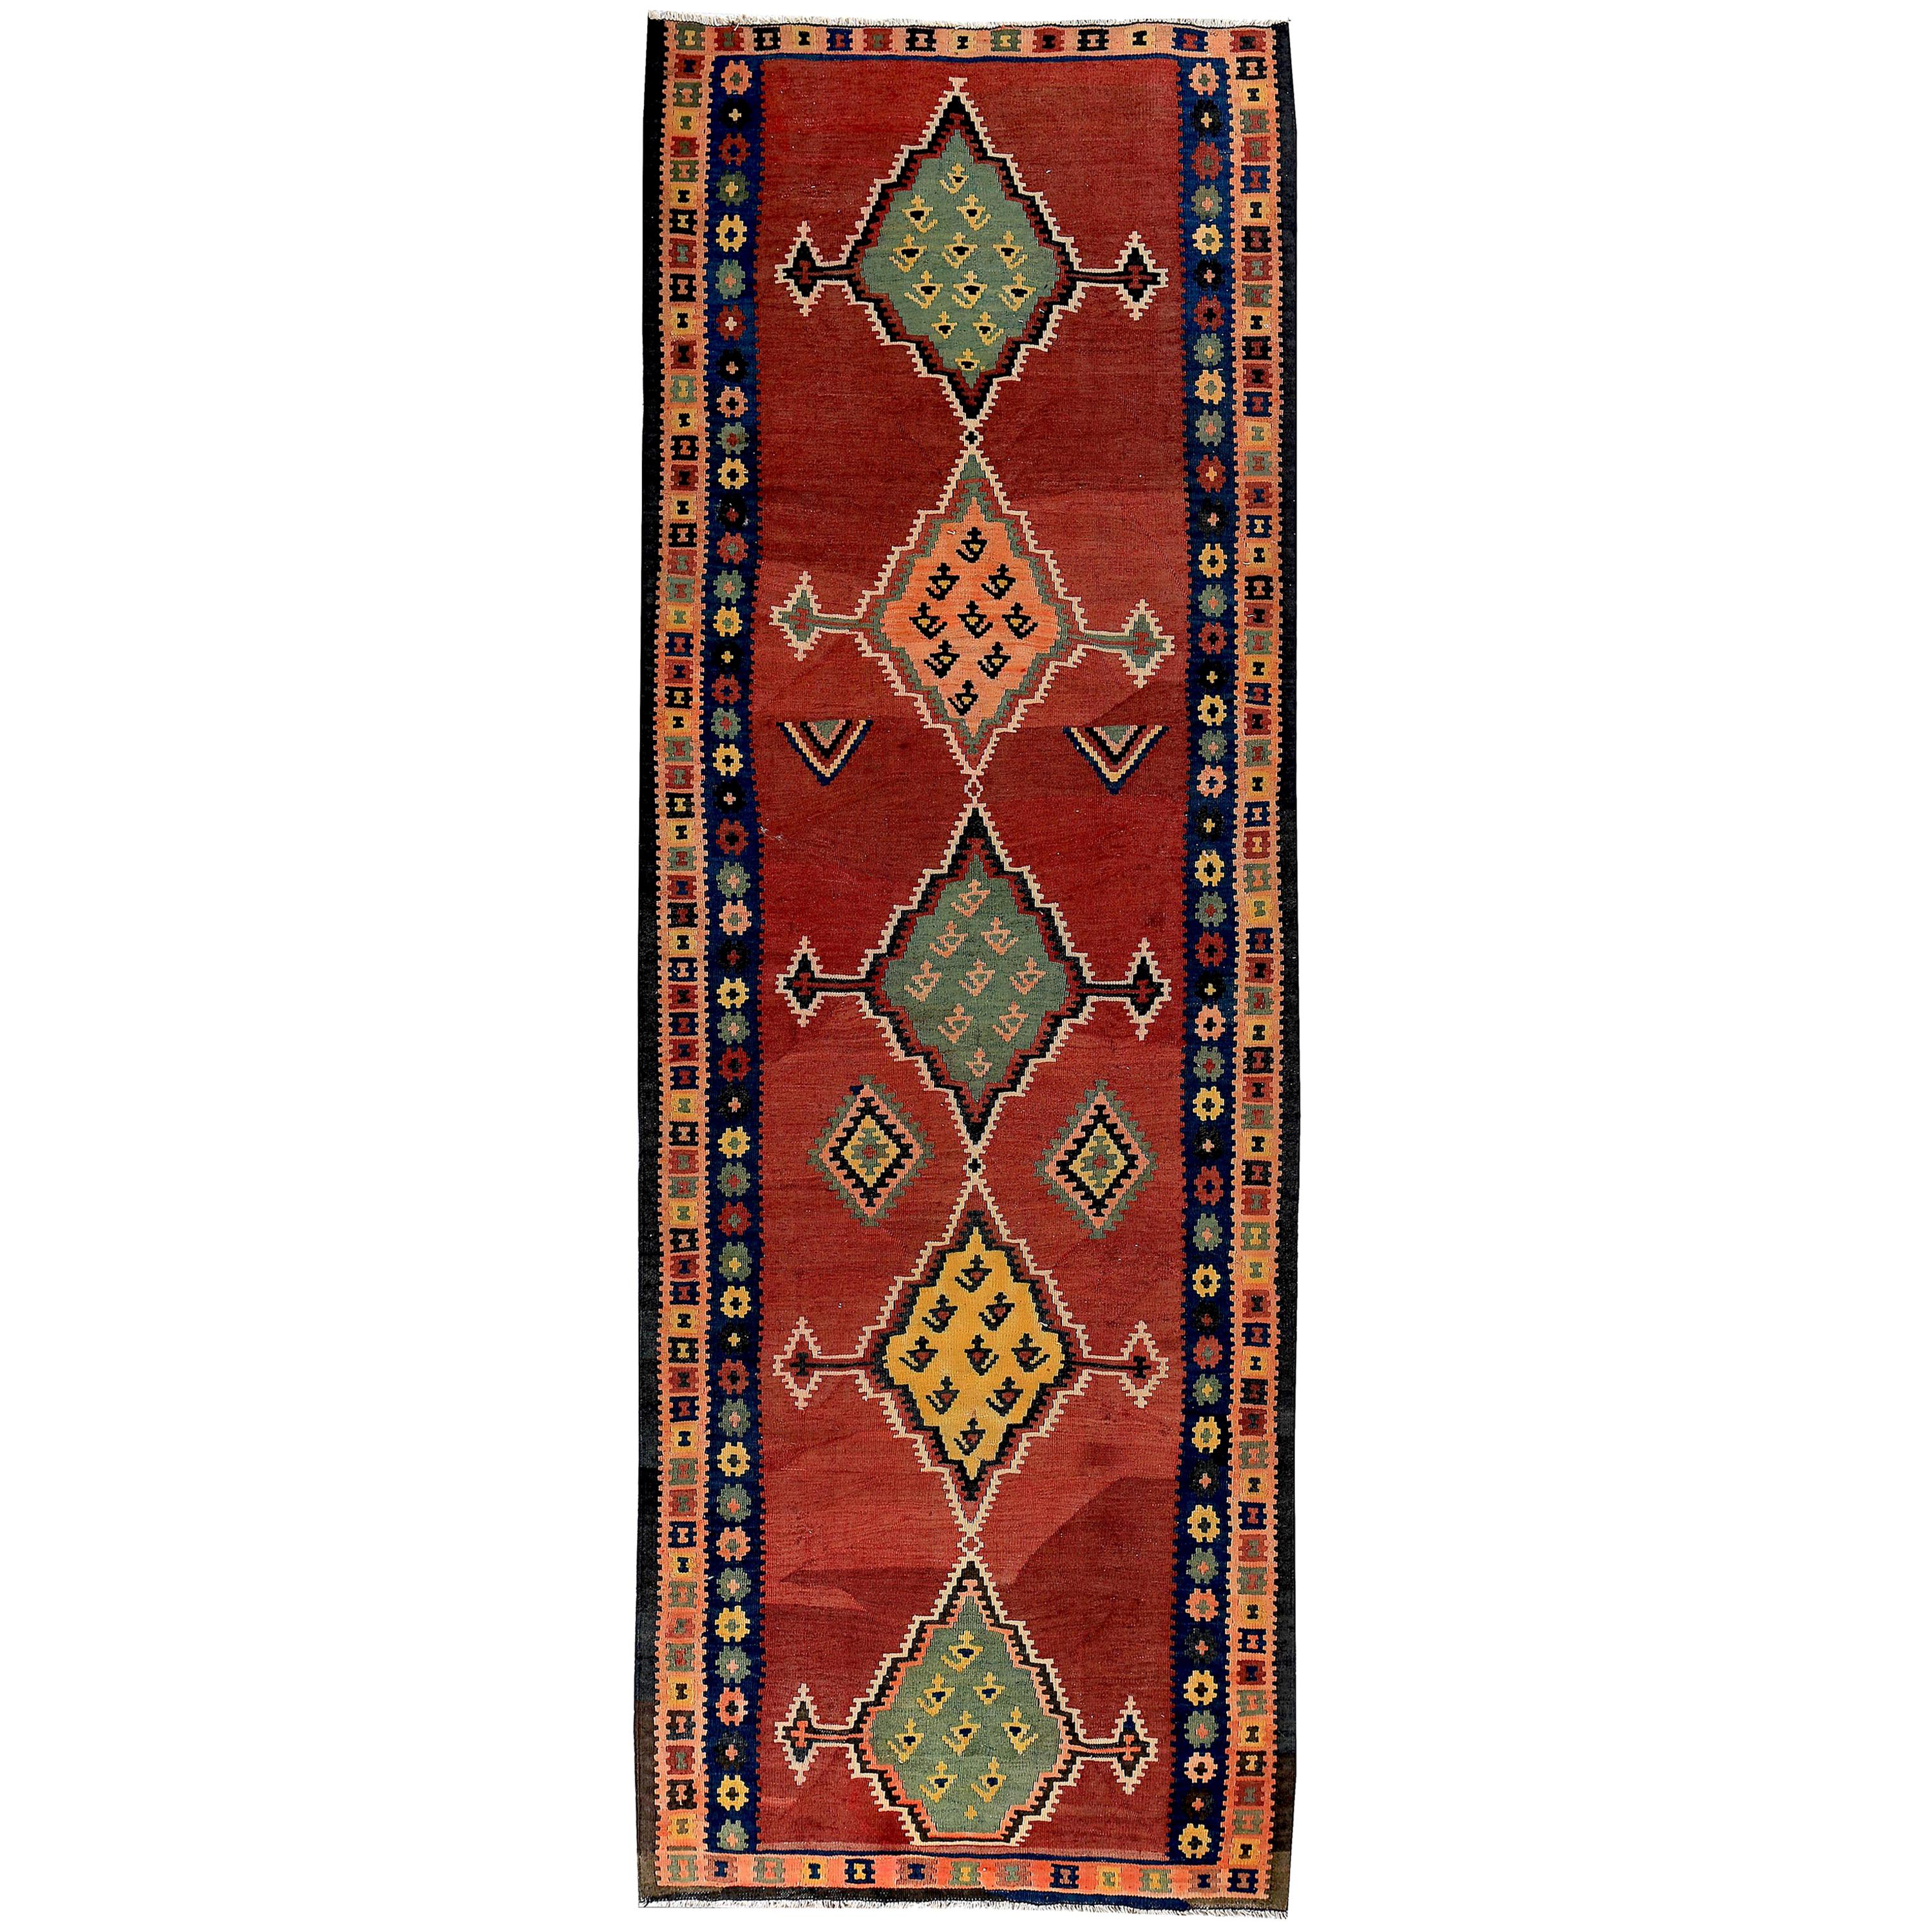 Turkish Kilim Runner Rug with Green and Yellow Tribal Medallions on Red Field